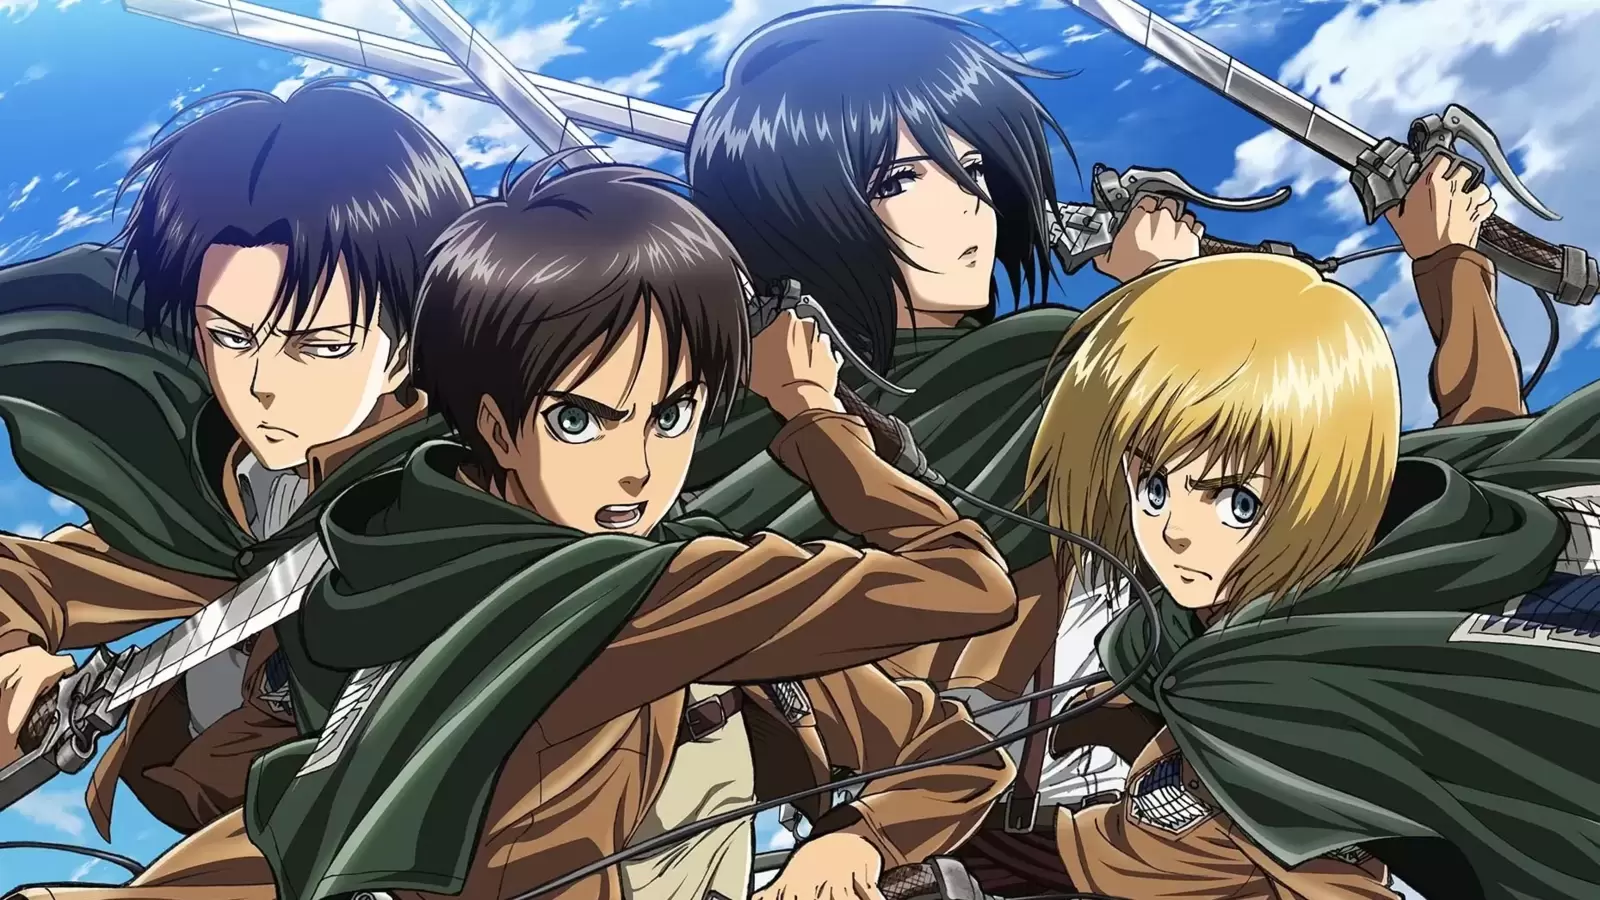 Attack on Titan Season 4 Part 3 (Part 2) English Dub Release Date Speculations